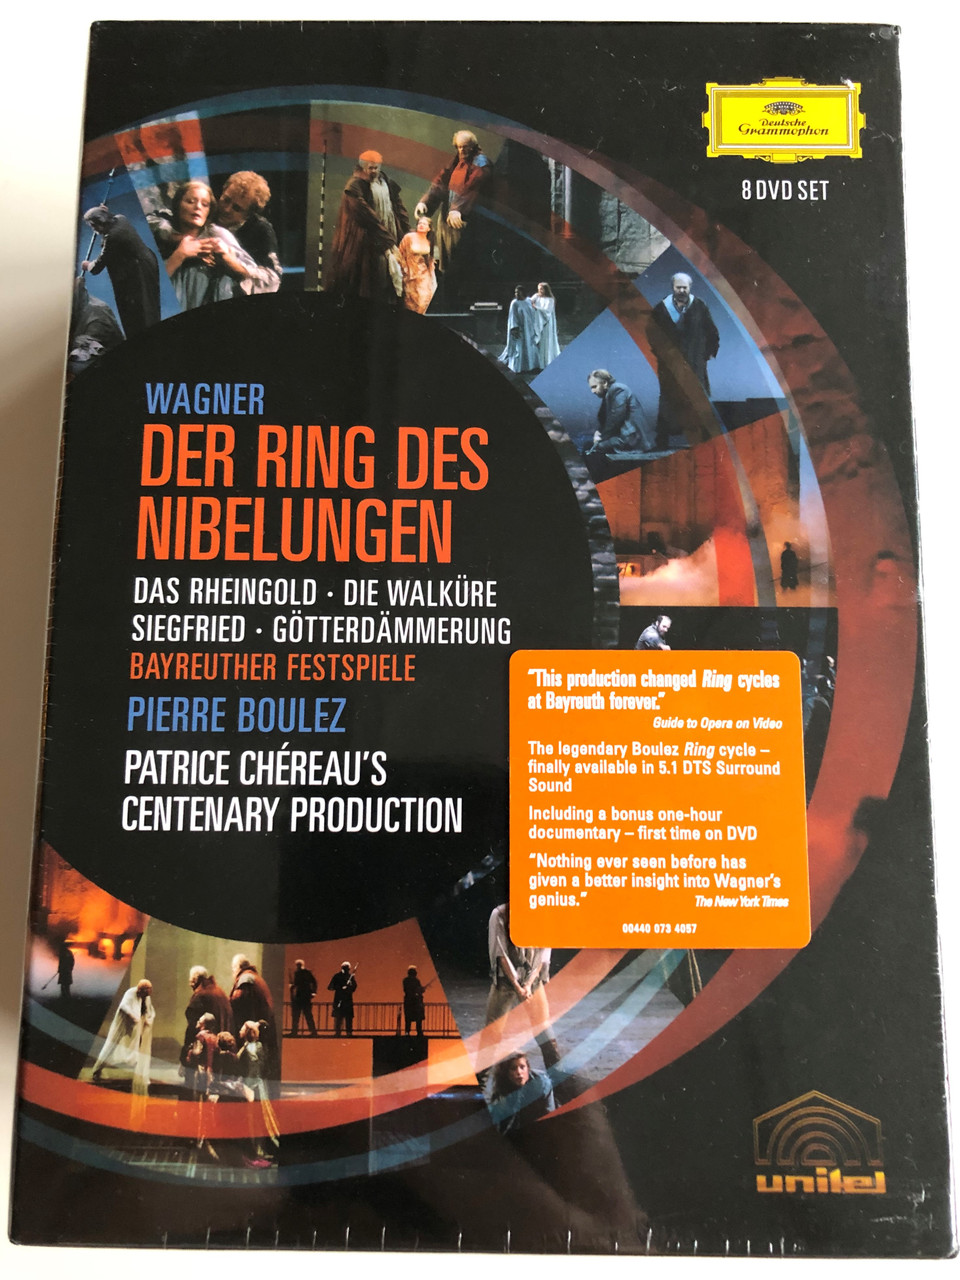 munt parallel archief R. Wagner - Der Ring des Nibelungen 8 DVD SET Bayreuther Festspiele /  Pierre Boulez / Directed by Brian Large / Patrice Chéreau's Centenary  Production / Bonus - Making of the Ring documentary - bibleinmylanguage